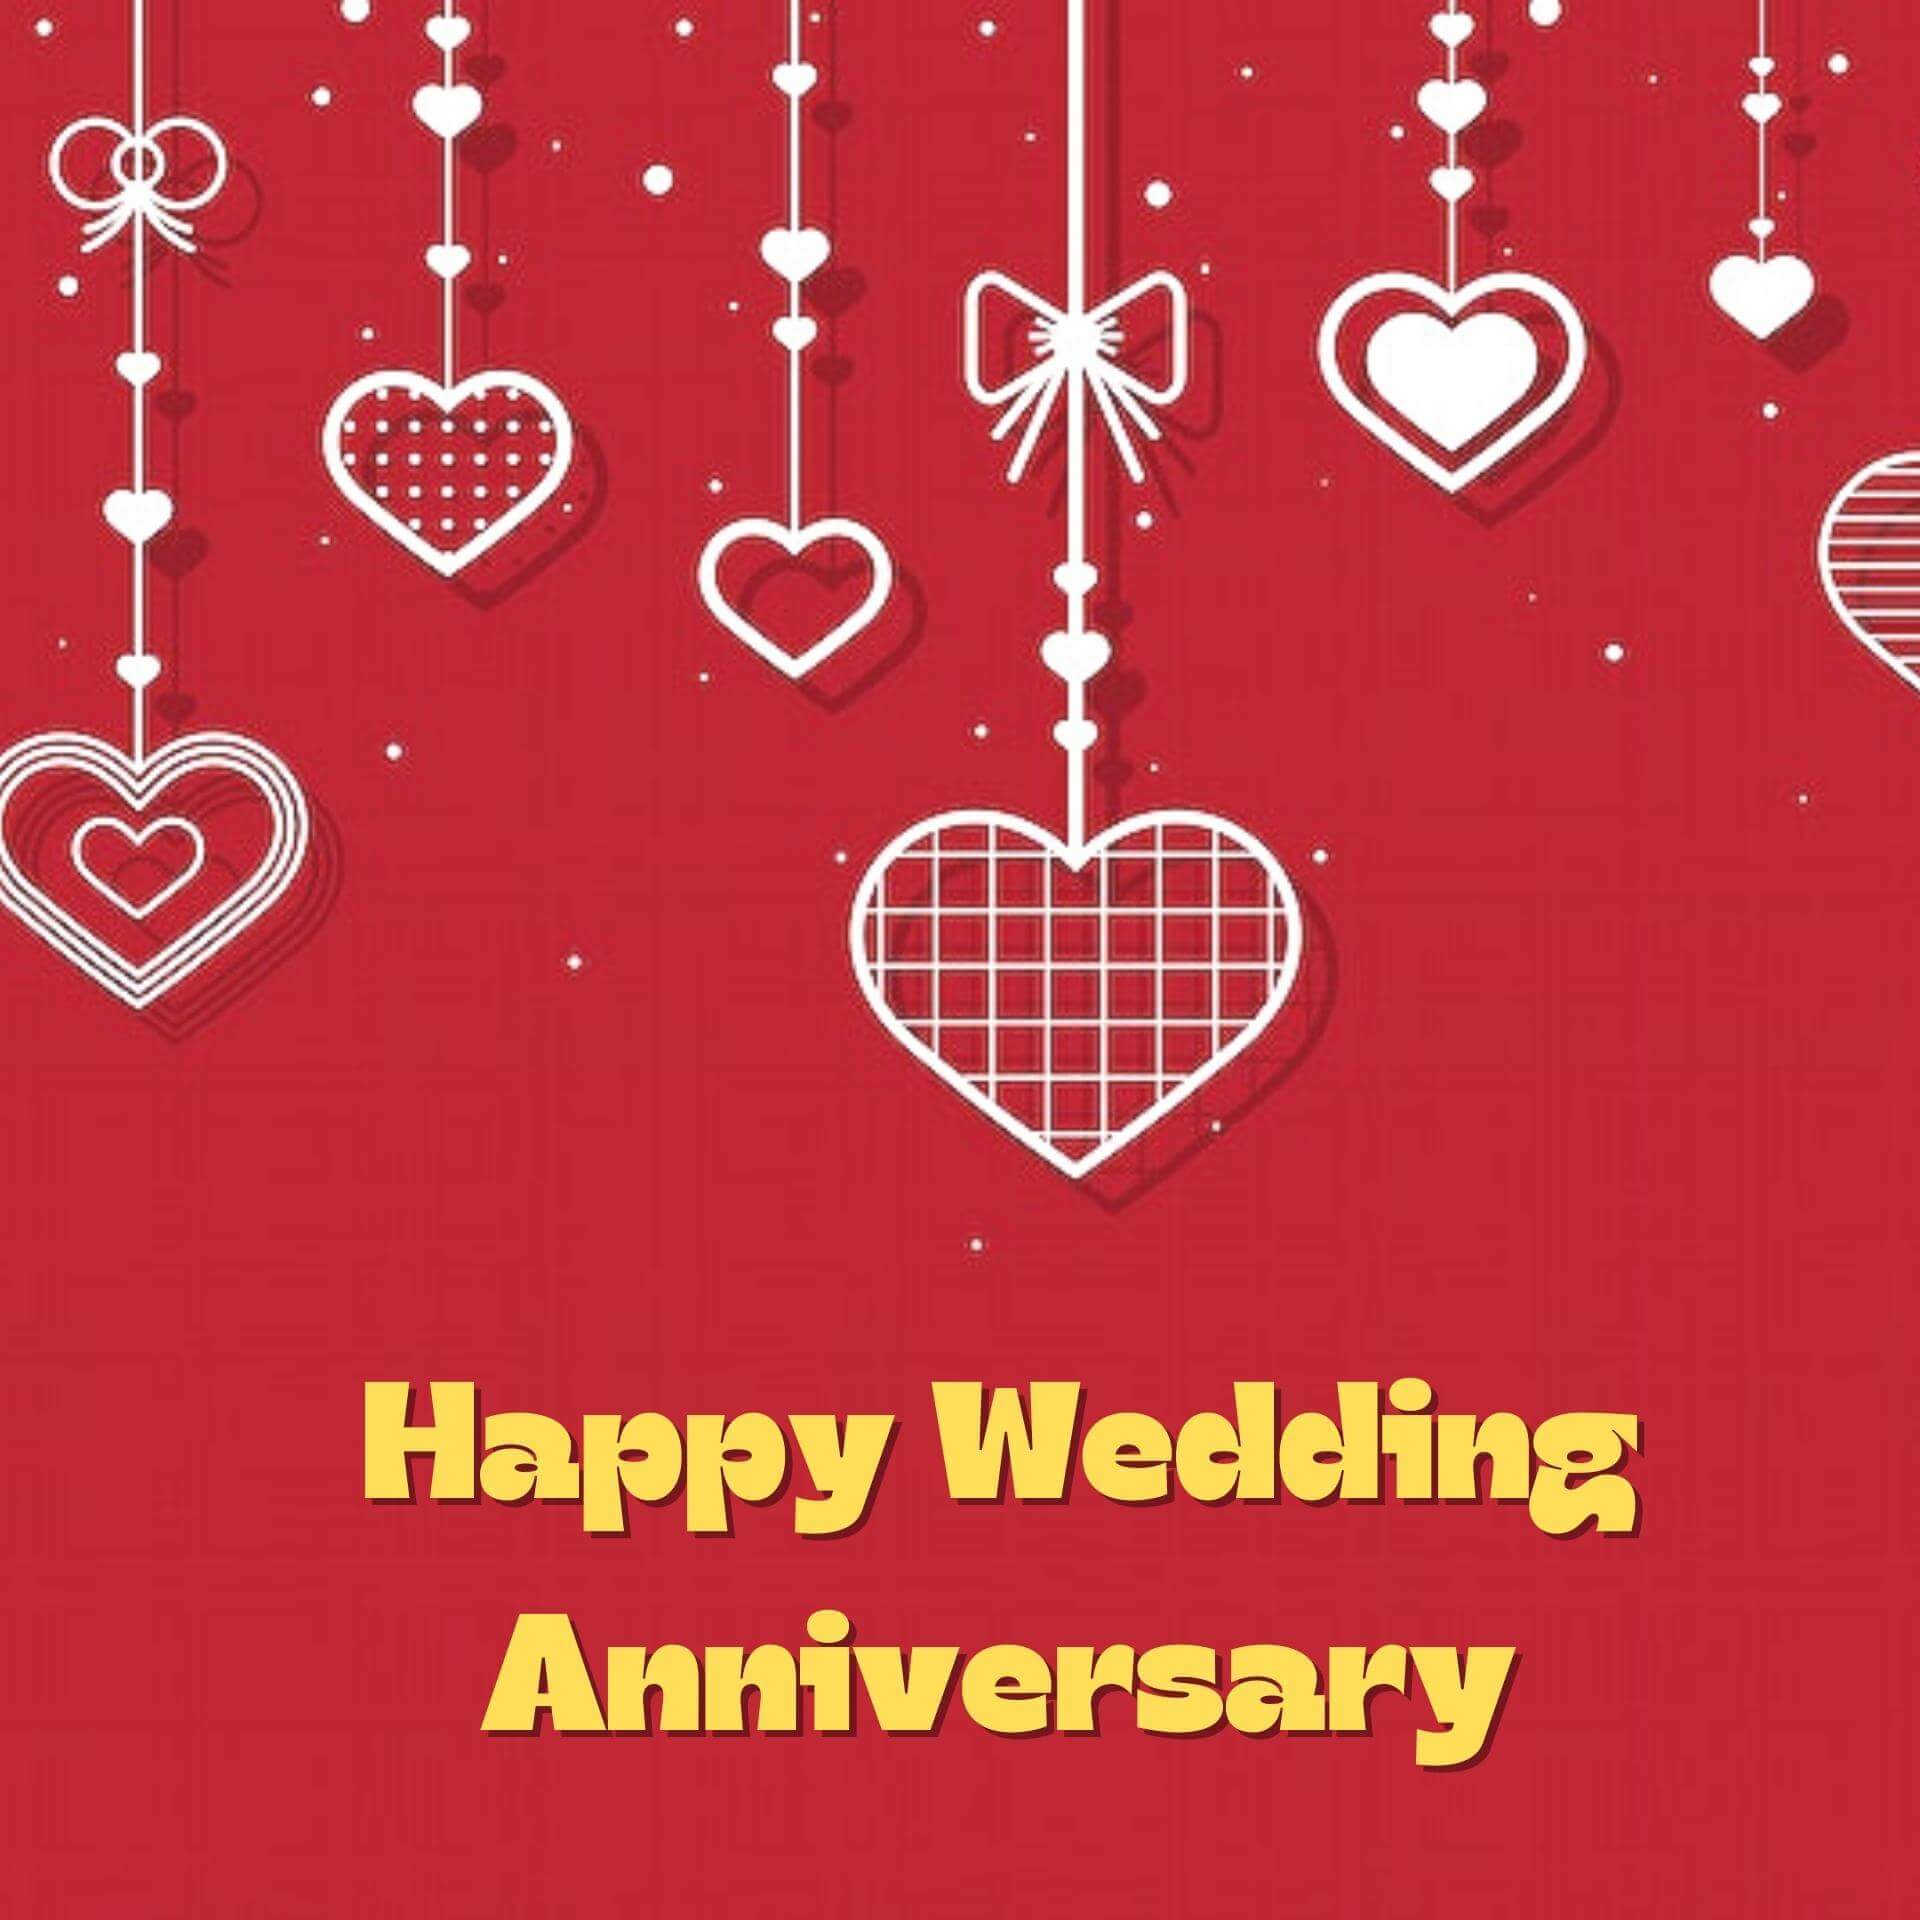 Details 100 wedding anniversary background hd images free download -  